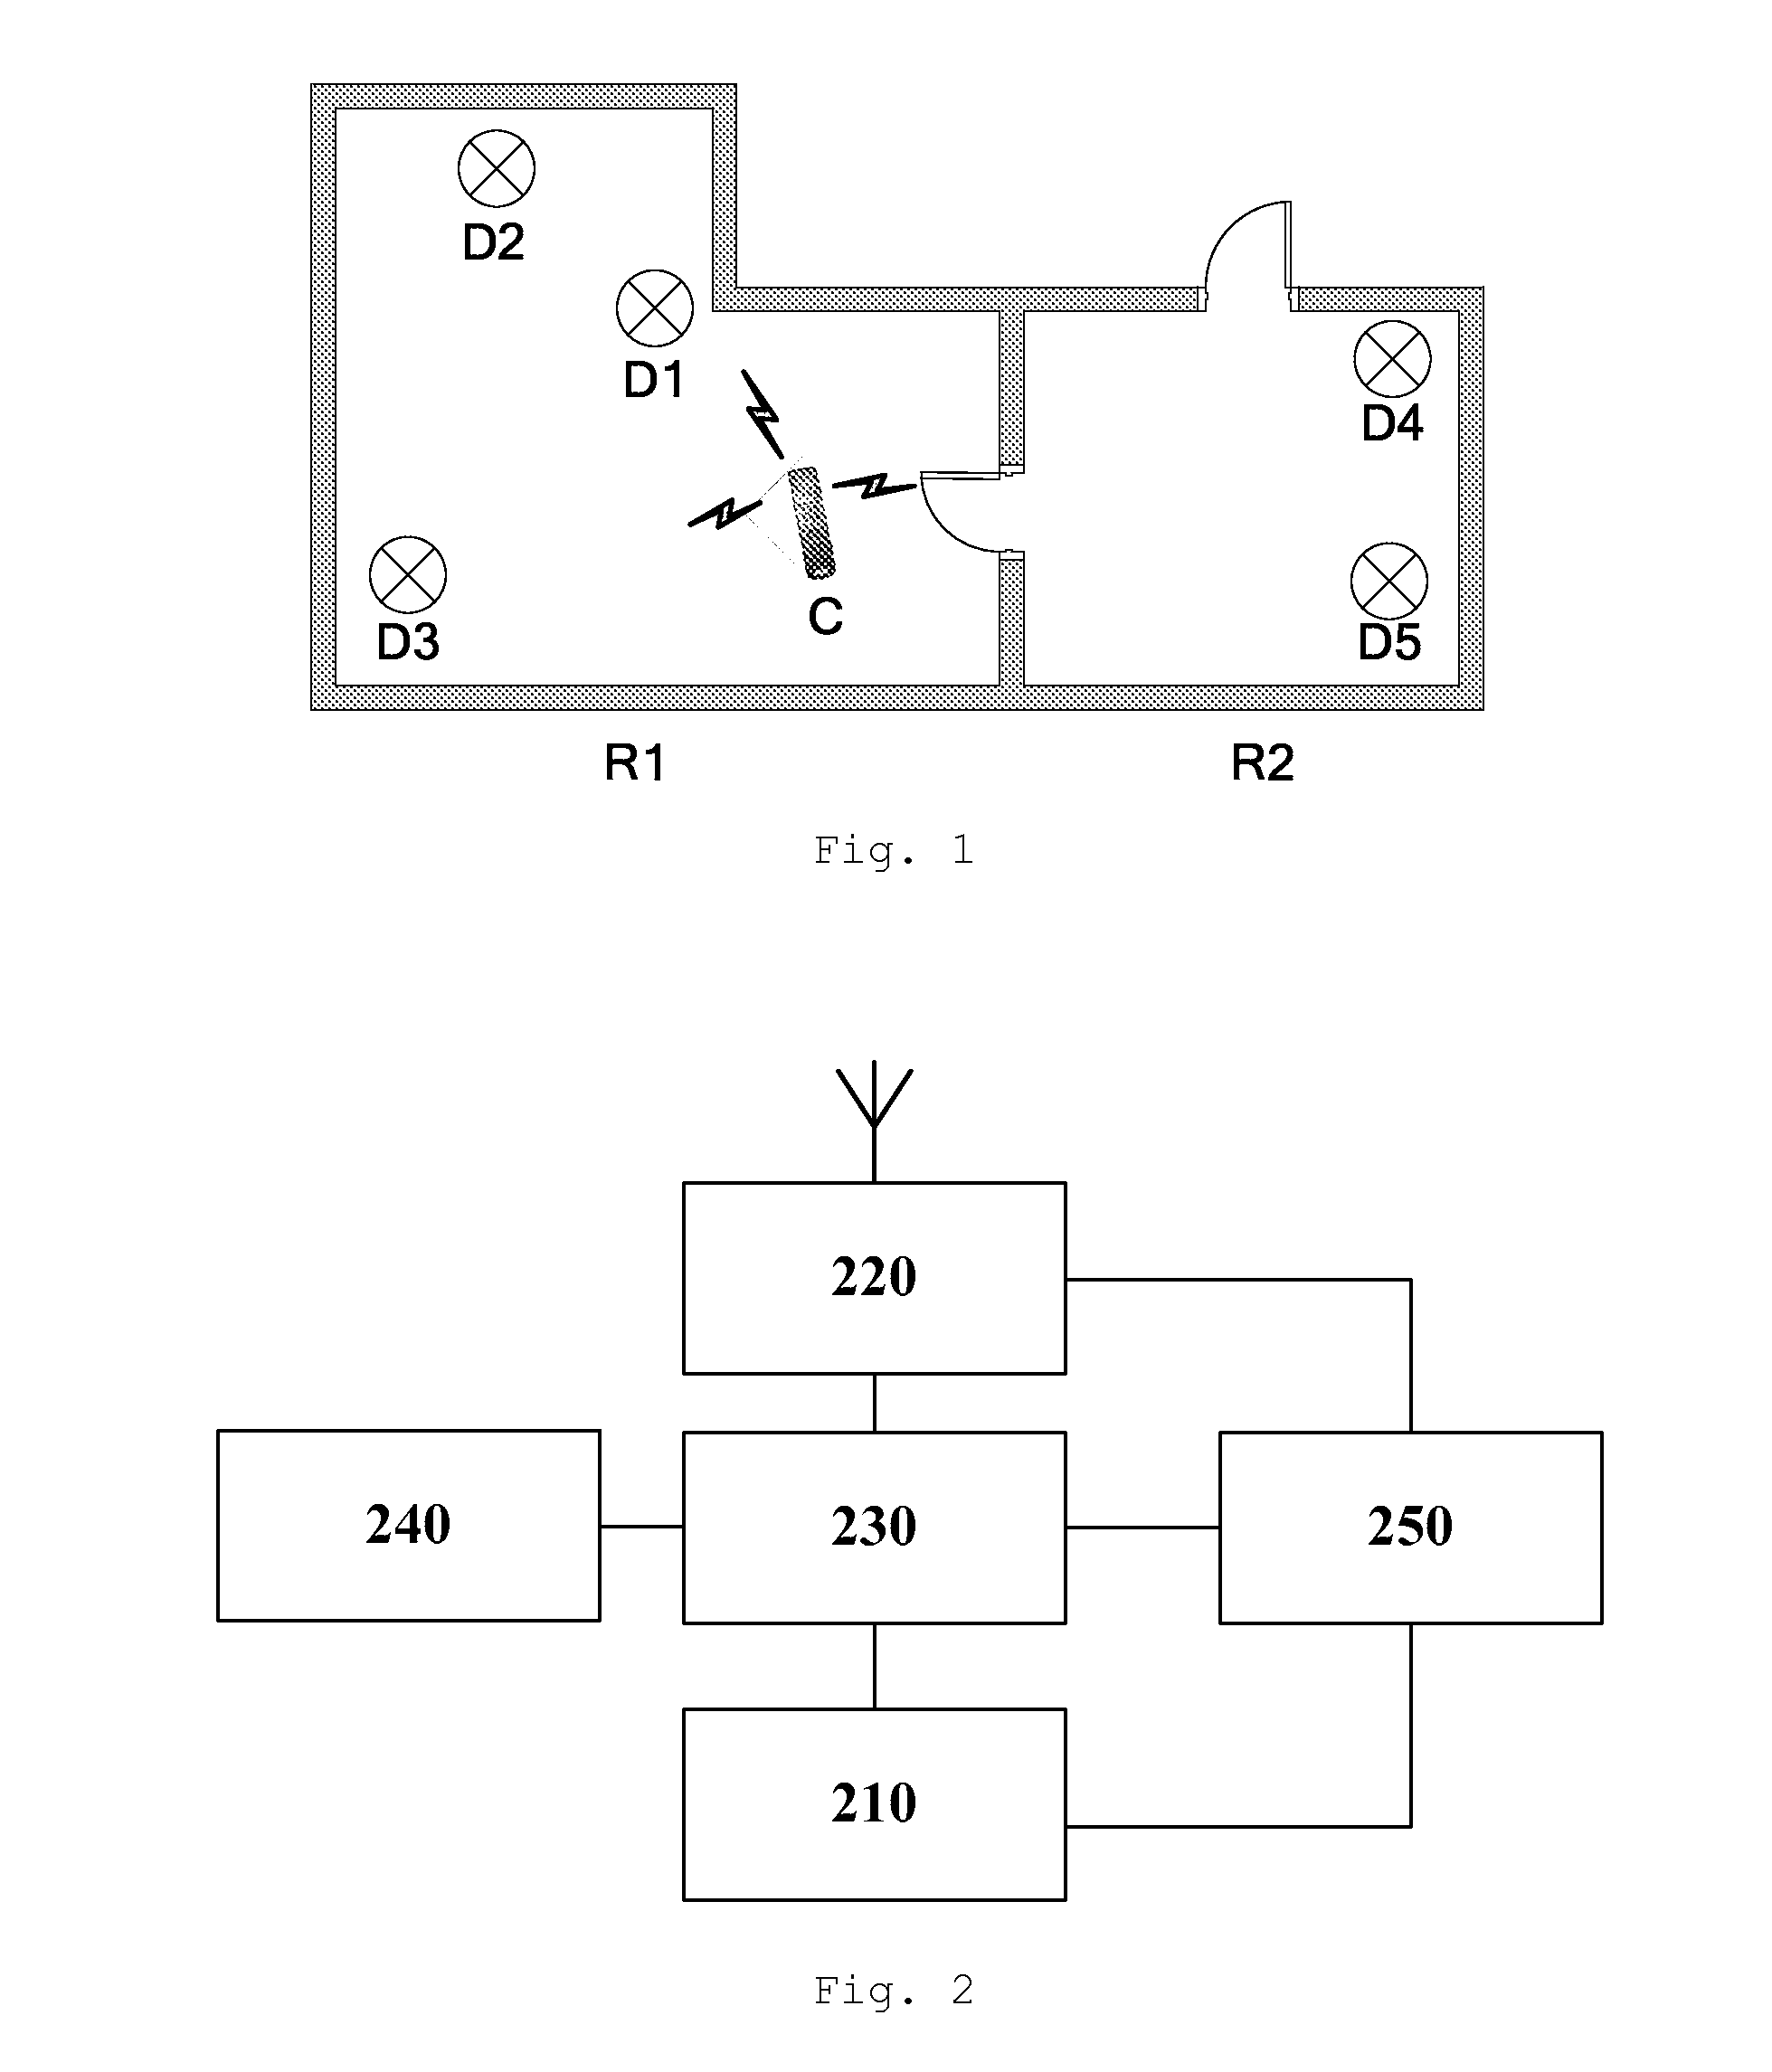 Methods for selecting and controlling devices